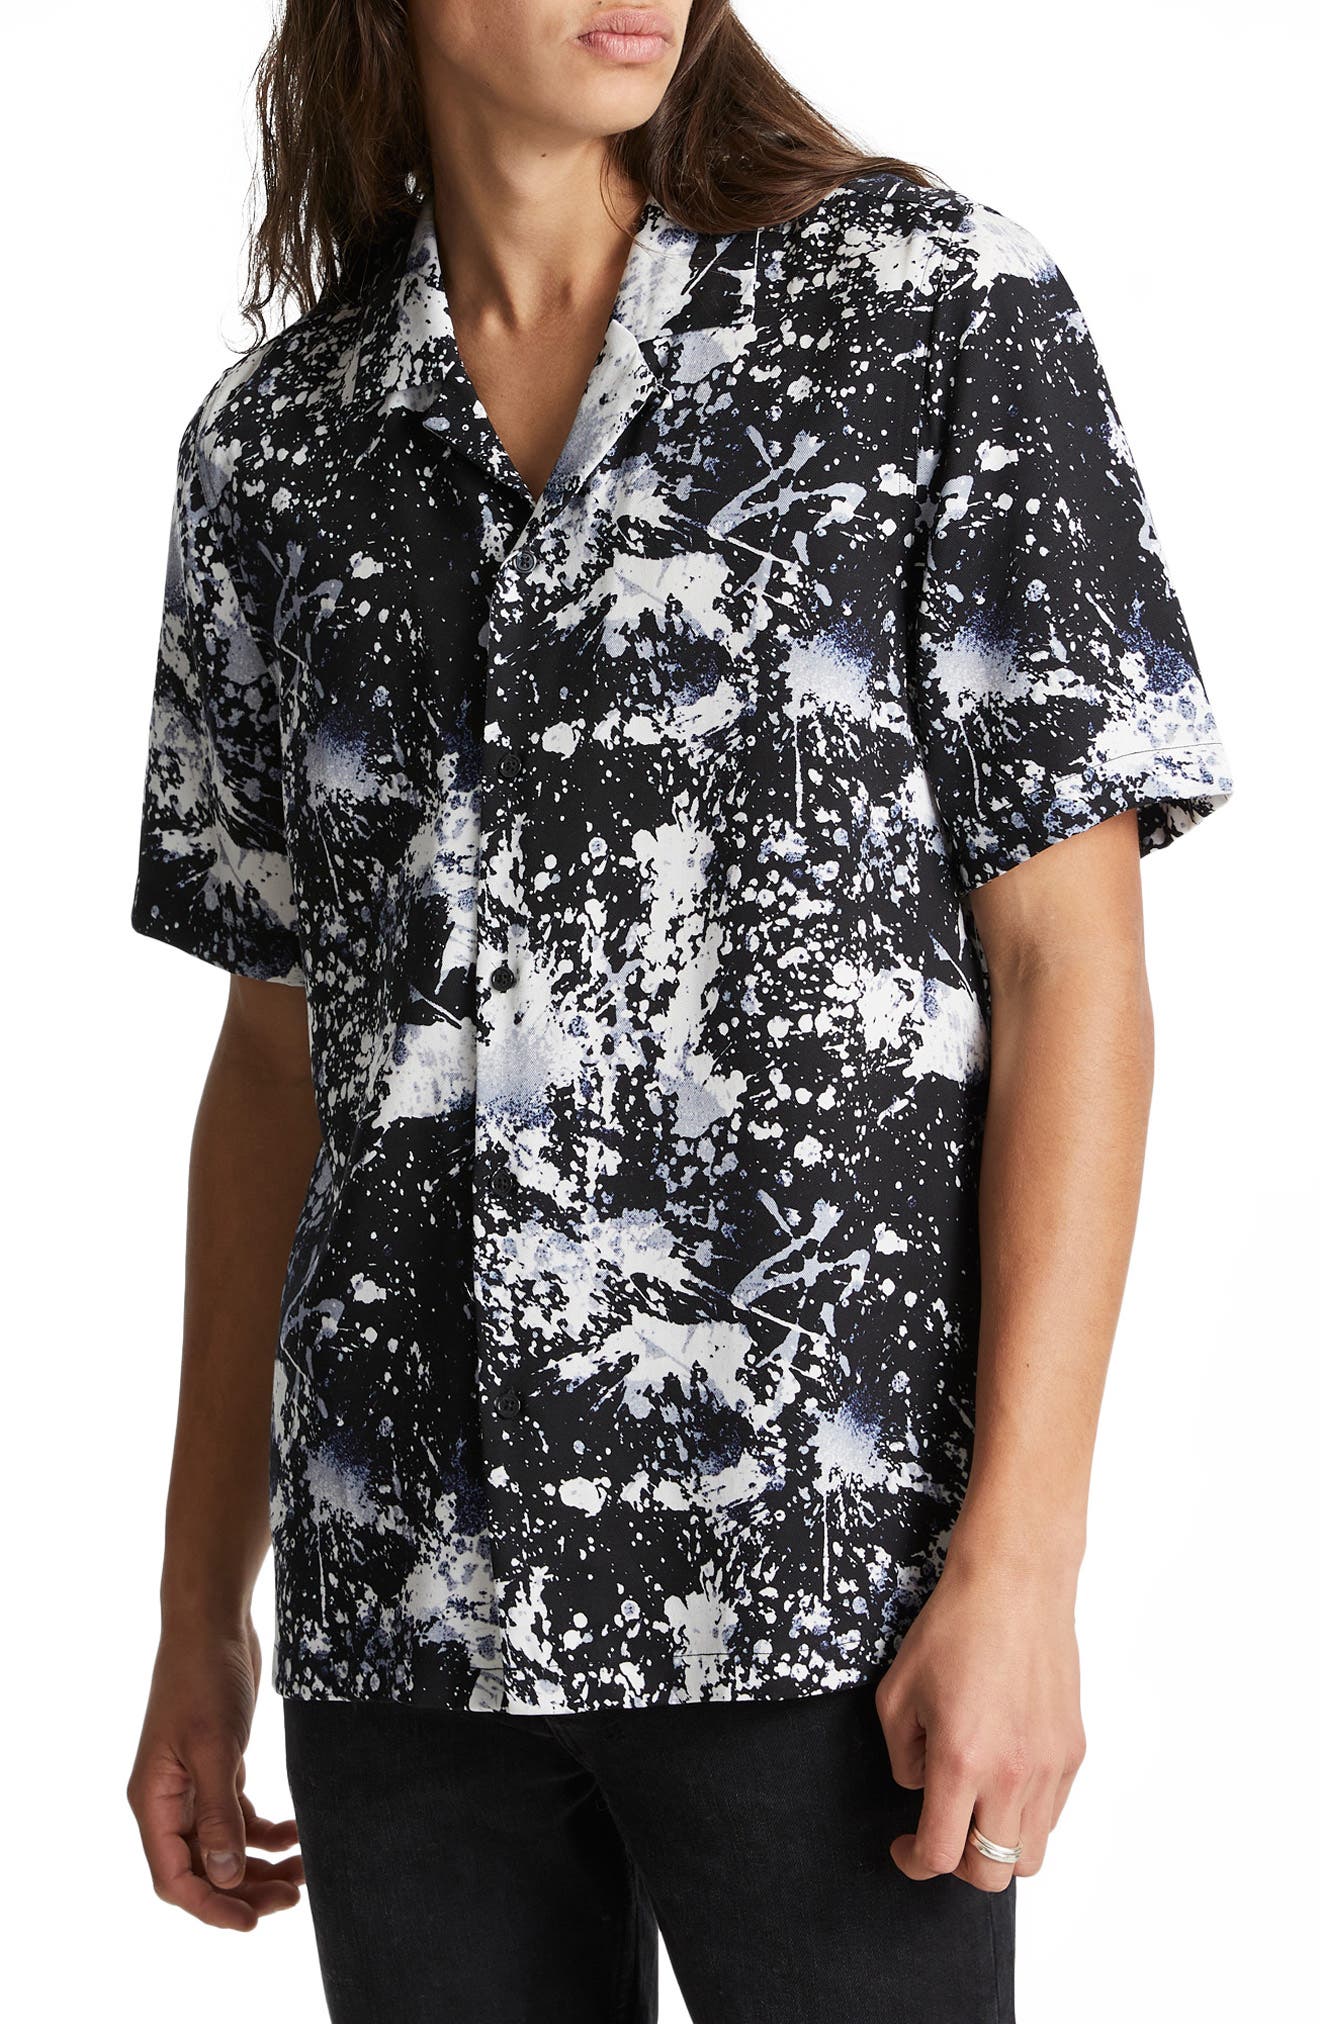 Ksubi Splash Back Relaxed Fit Short Sleeve Button-Up Shirt in Multi Co at Nordstrom, Size Small